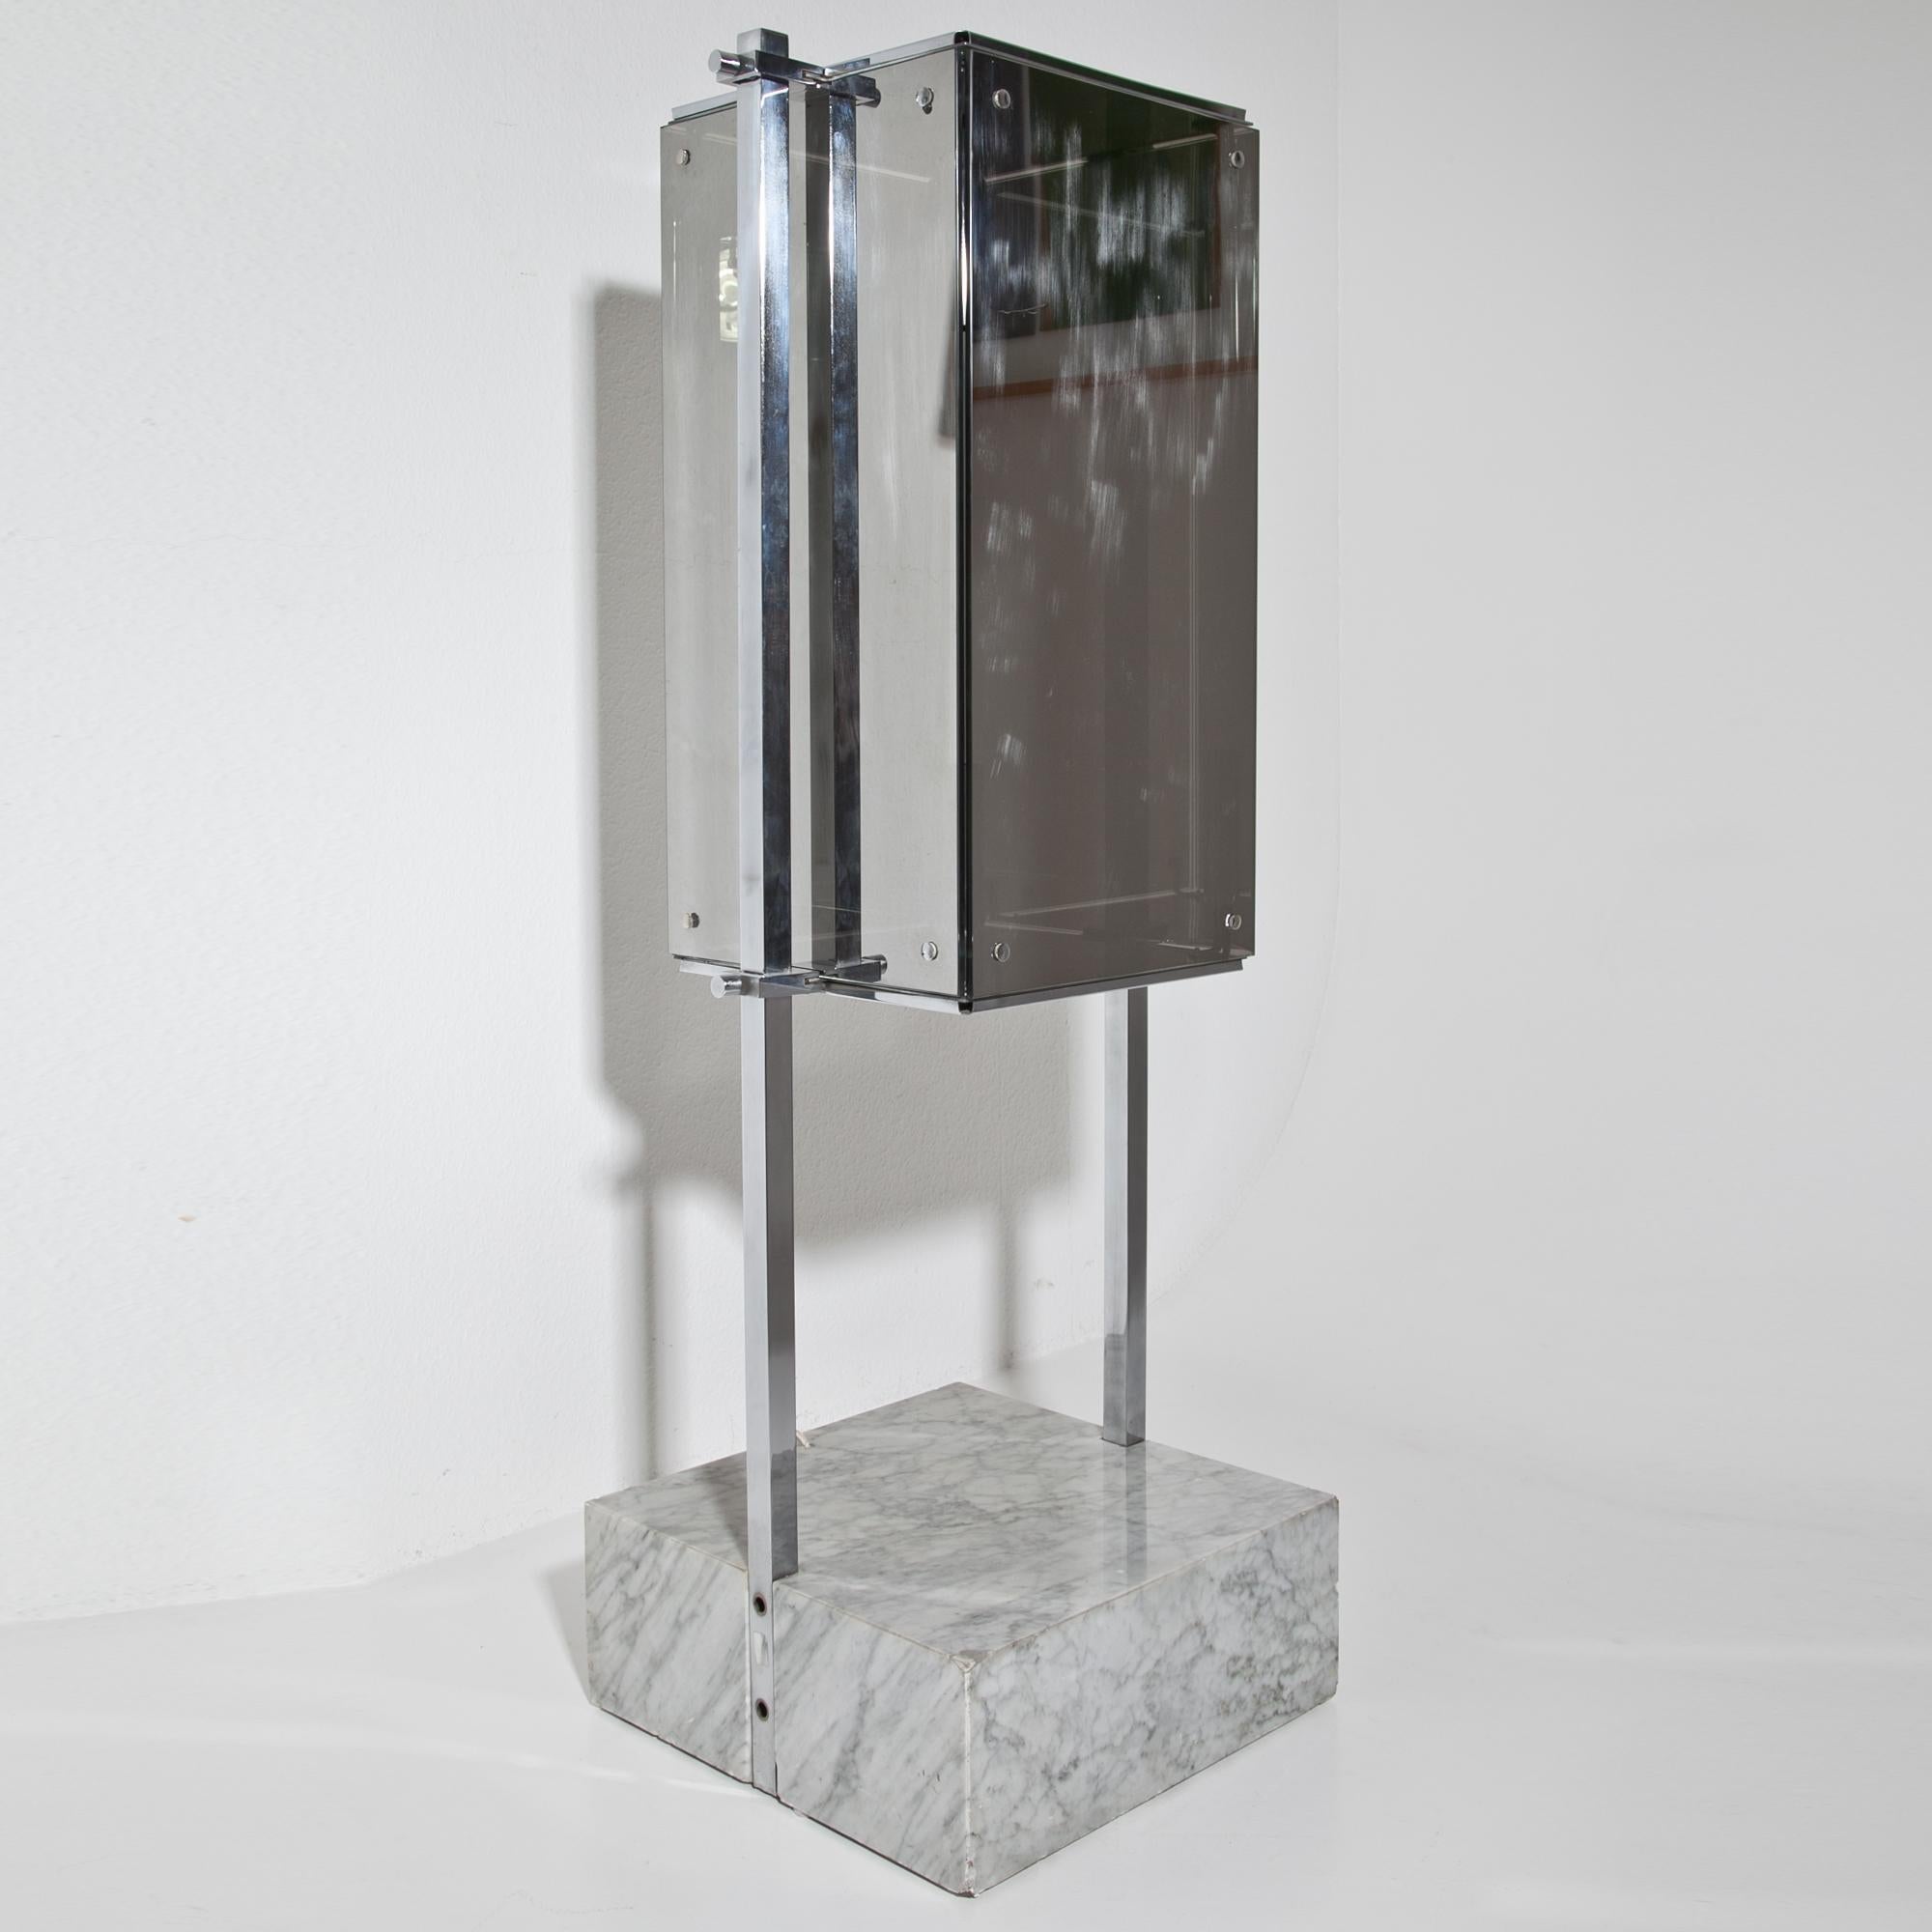 Floor lamp standing on a heavy white marble base, with a chromed frame and mirrored surfaces. For the electrification we assume no liability and no warranty.